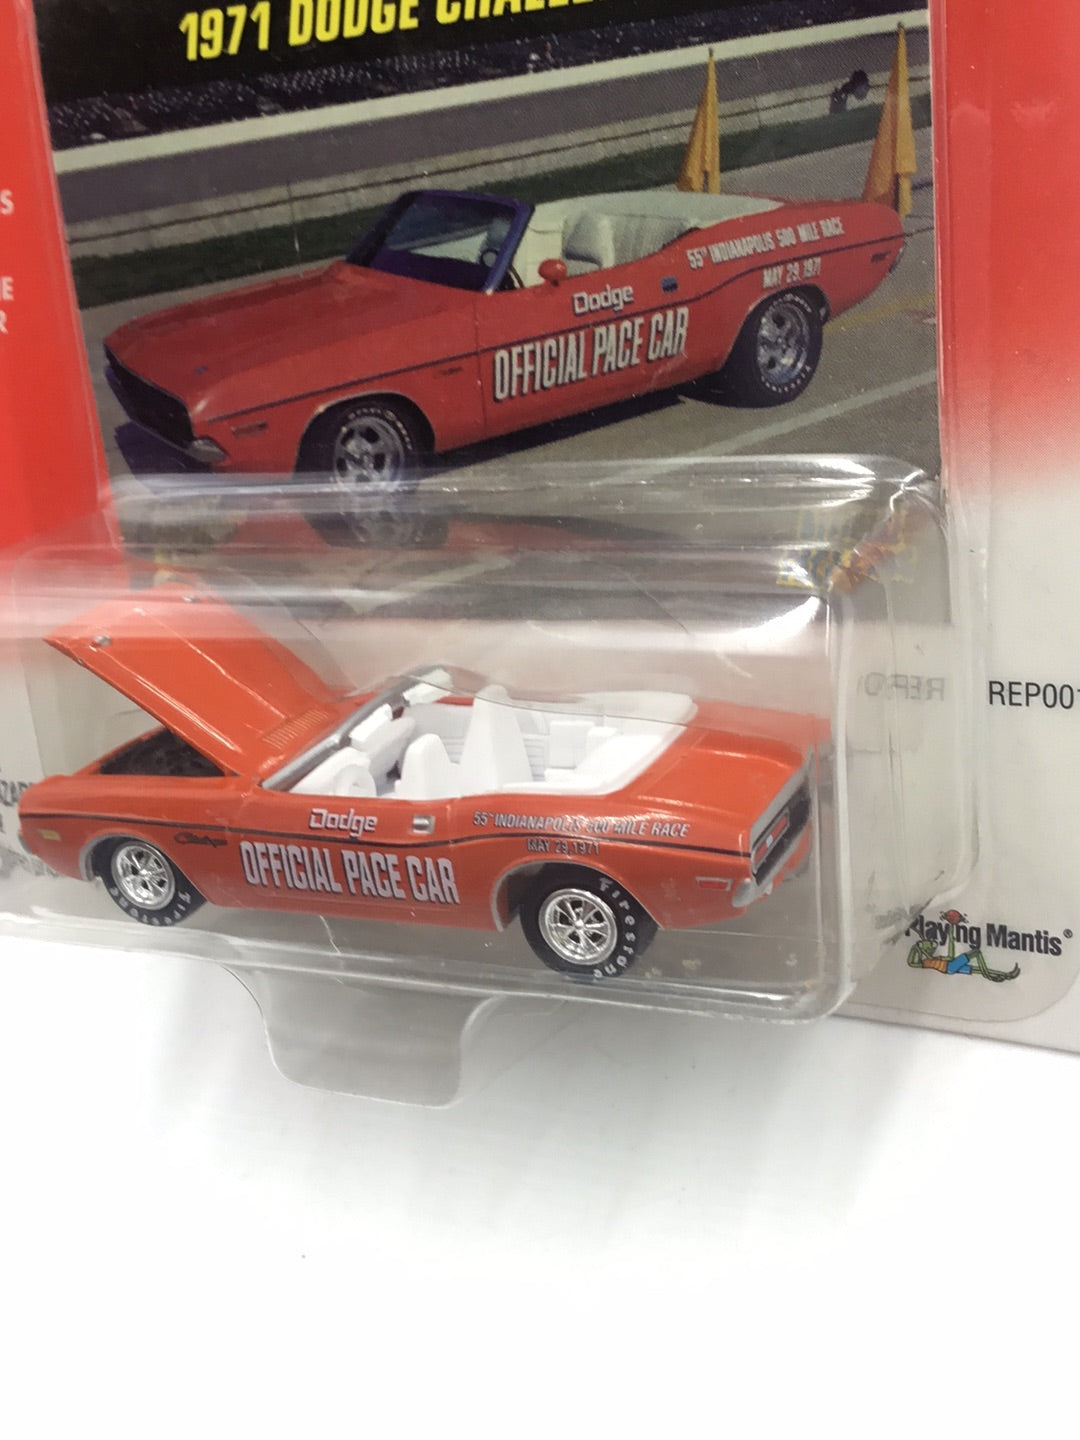 Johnny lightning Official Pace Cars 1971 Dodge Challenger QQ6